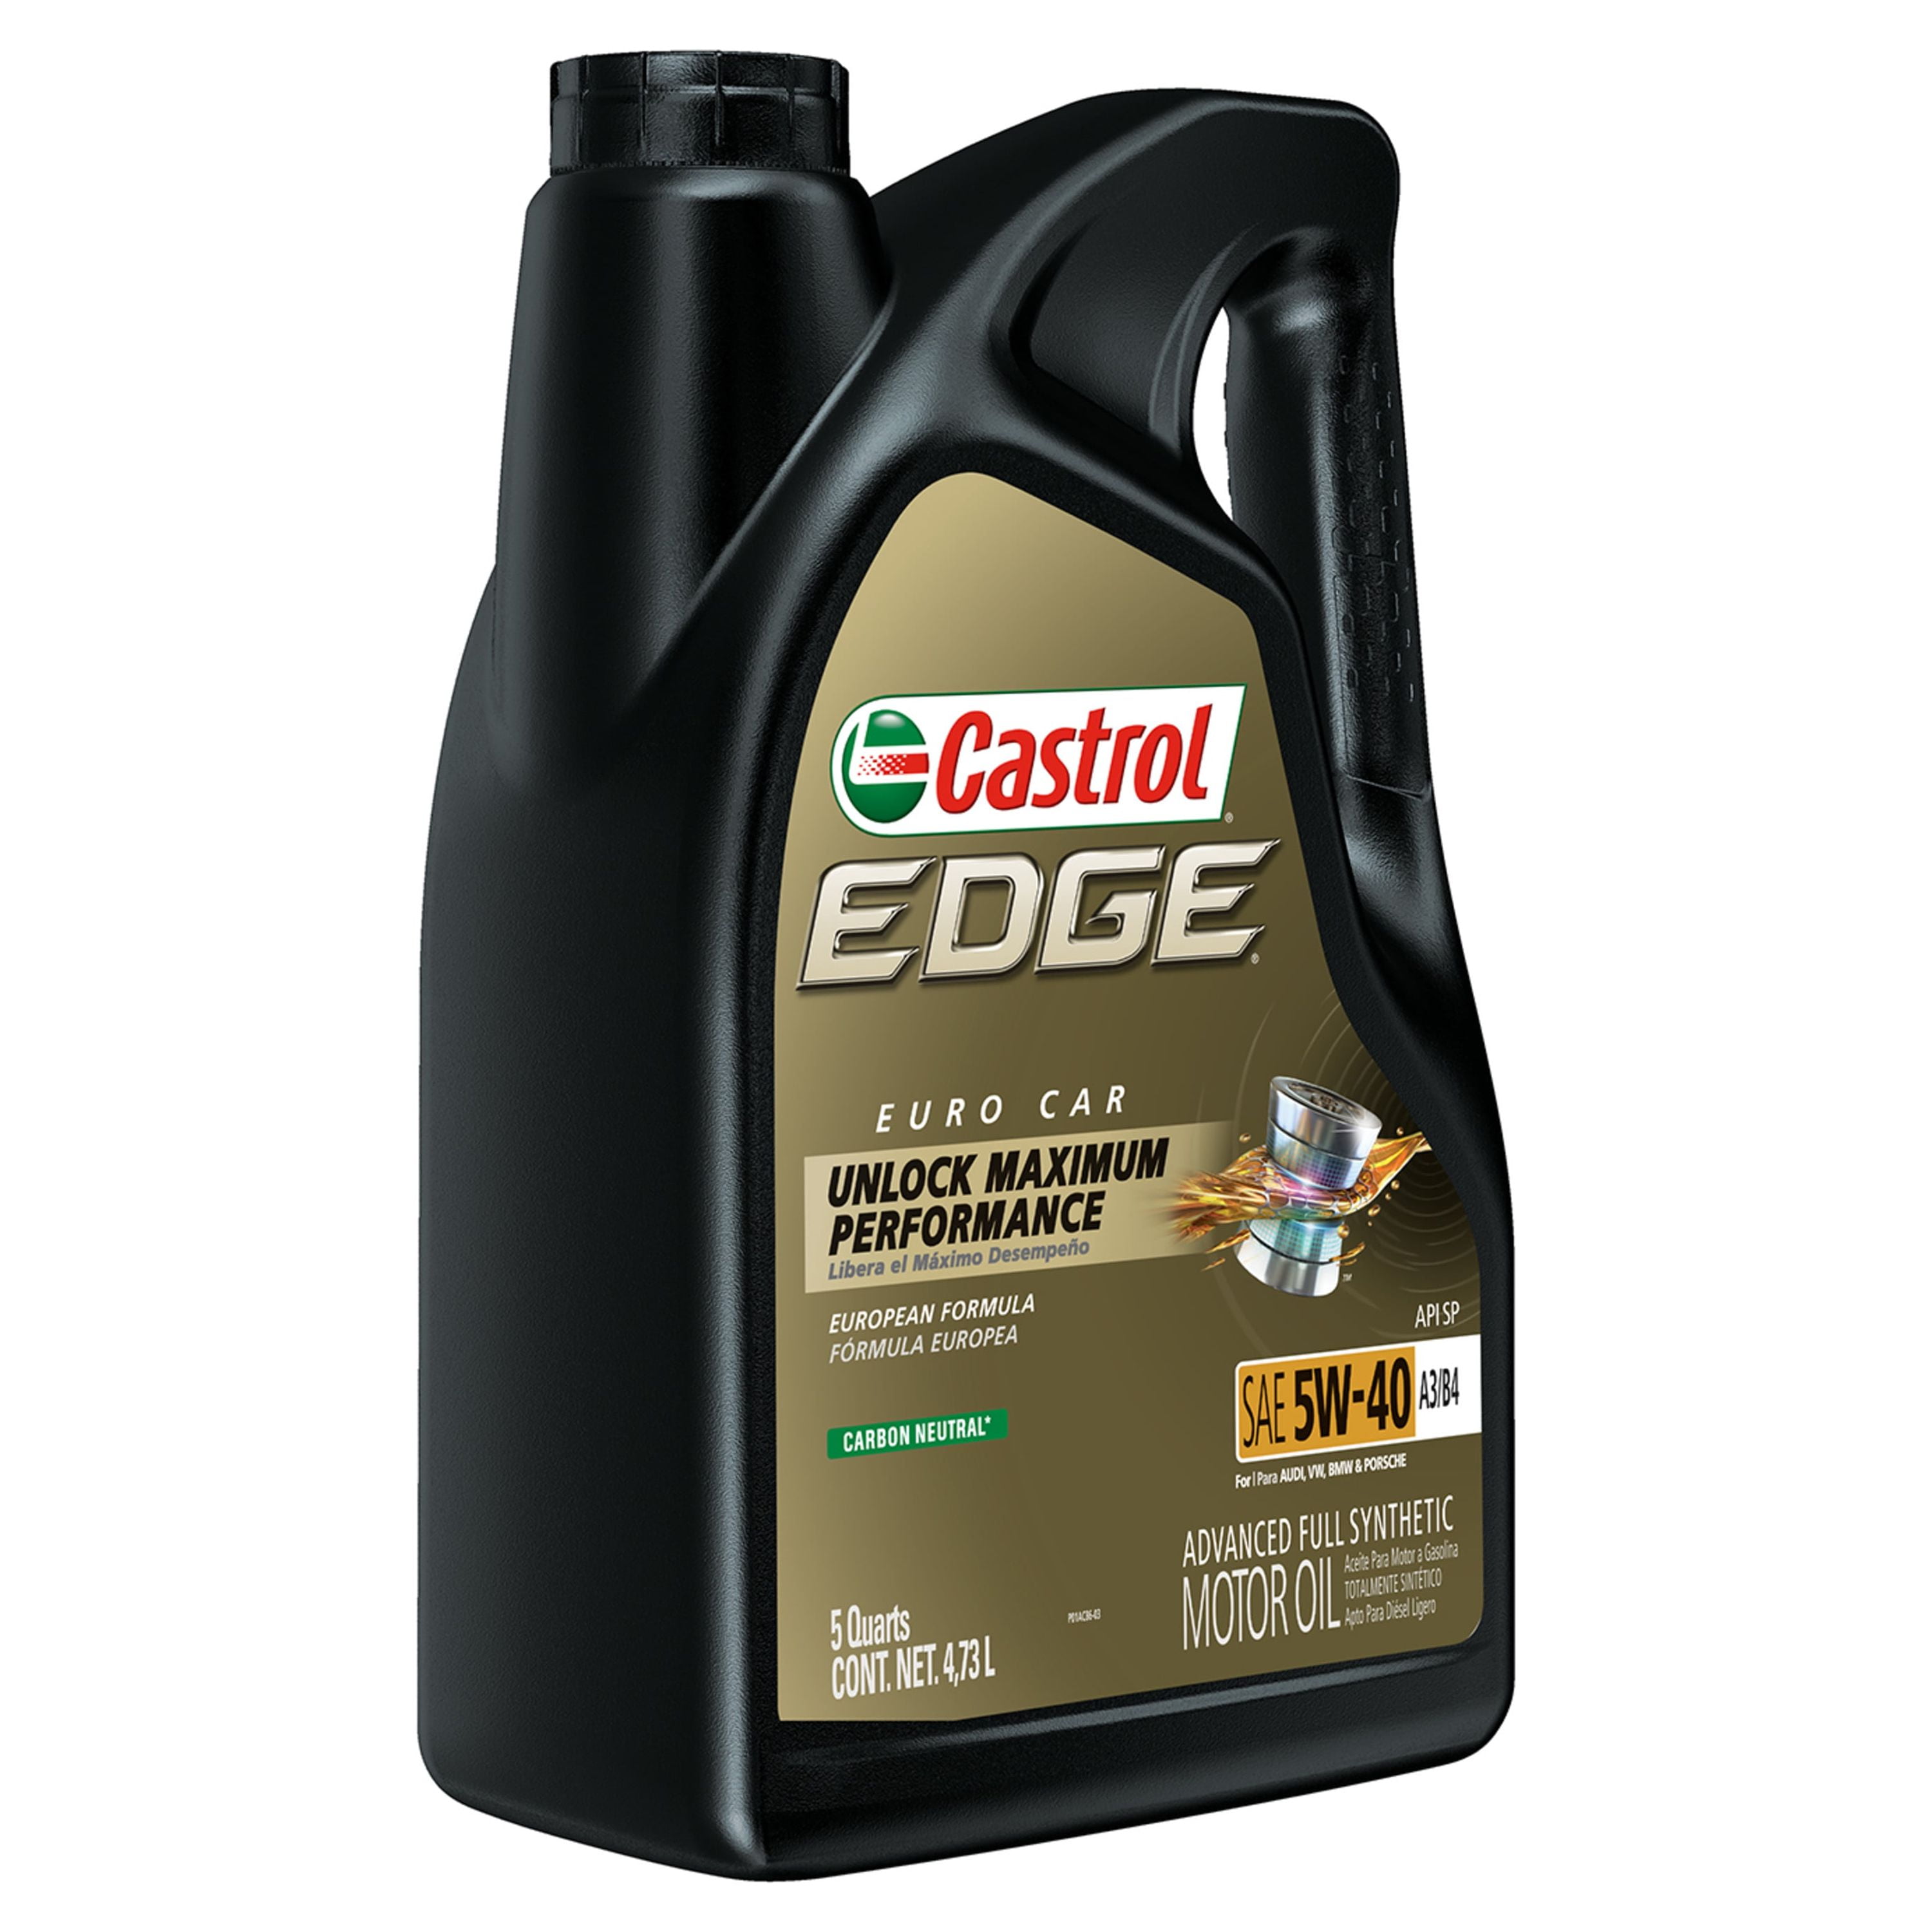 Castrol Edge SAE 5W-40 Advanced Full Synthetic Motor Oil, 5 qt - Smith's  Food and Drug